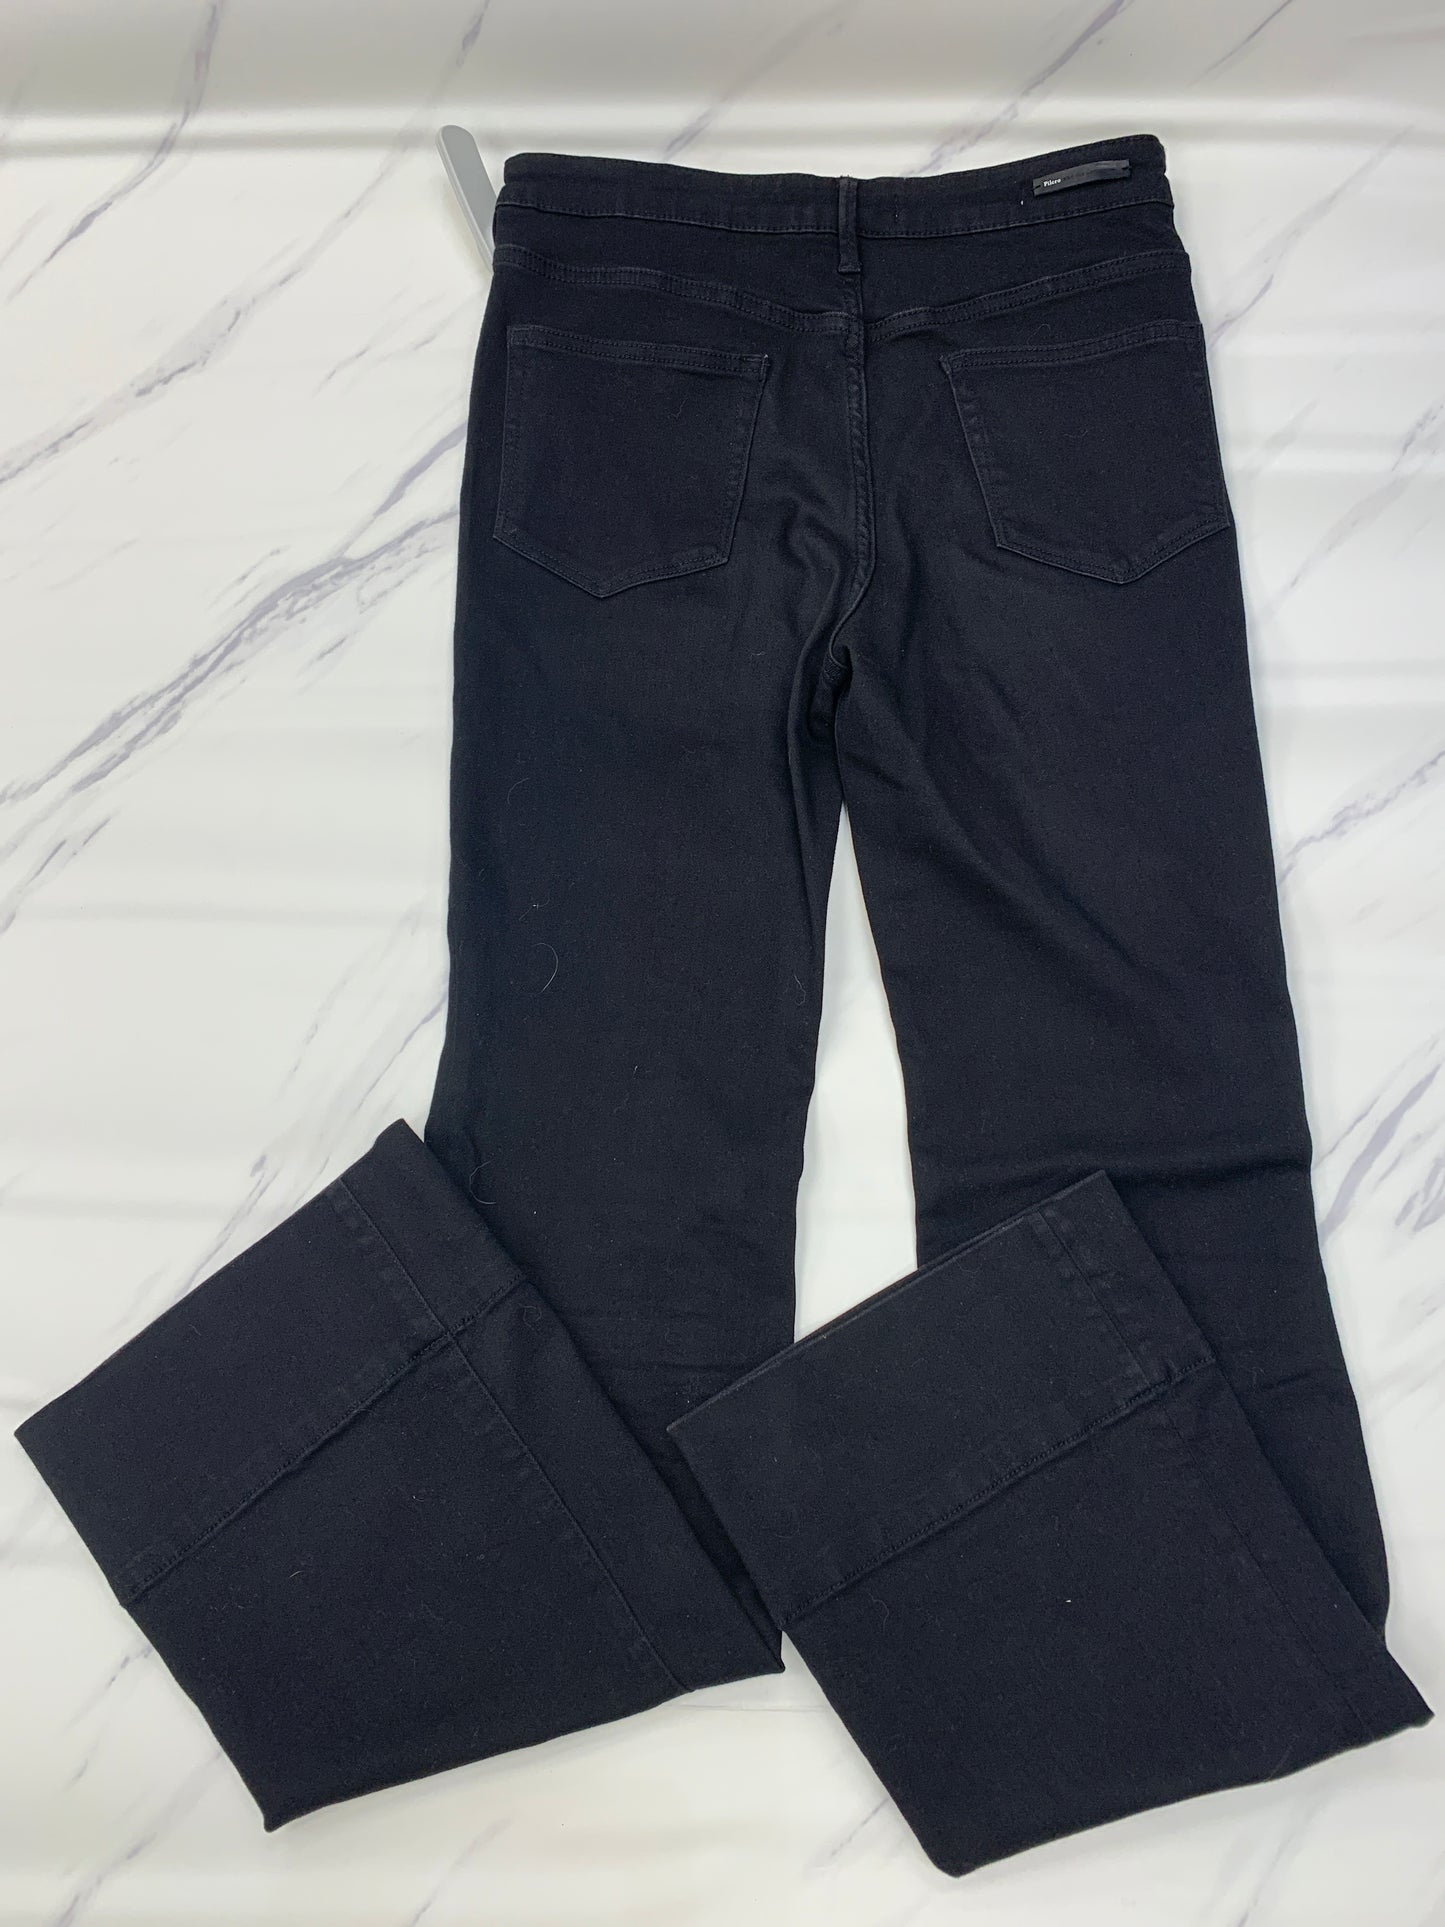 Jeans Flared By Pilcro  Size: 10